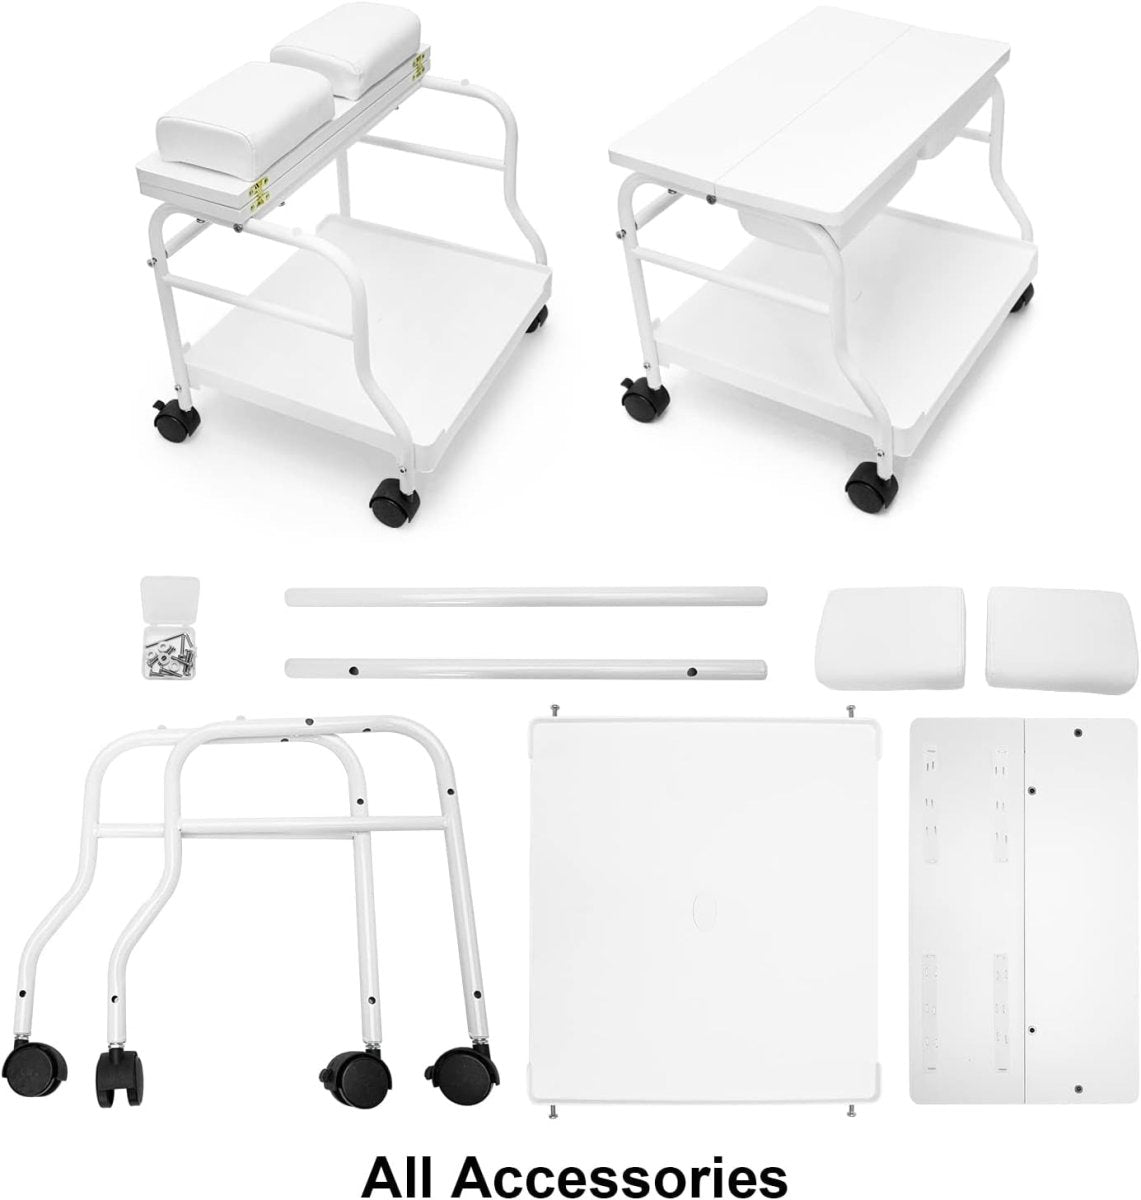 Beauty Salon Nail or Foot Bath Spa Portable Esthetician Trolley Cart for Foot Rest Pedicure Manicure Funiture Massage Table Salon Supplies 2 Way Use 2 Color Option (White) - Shiny Nails